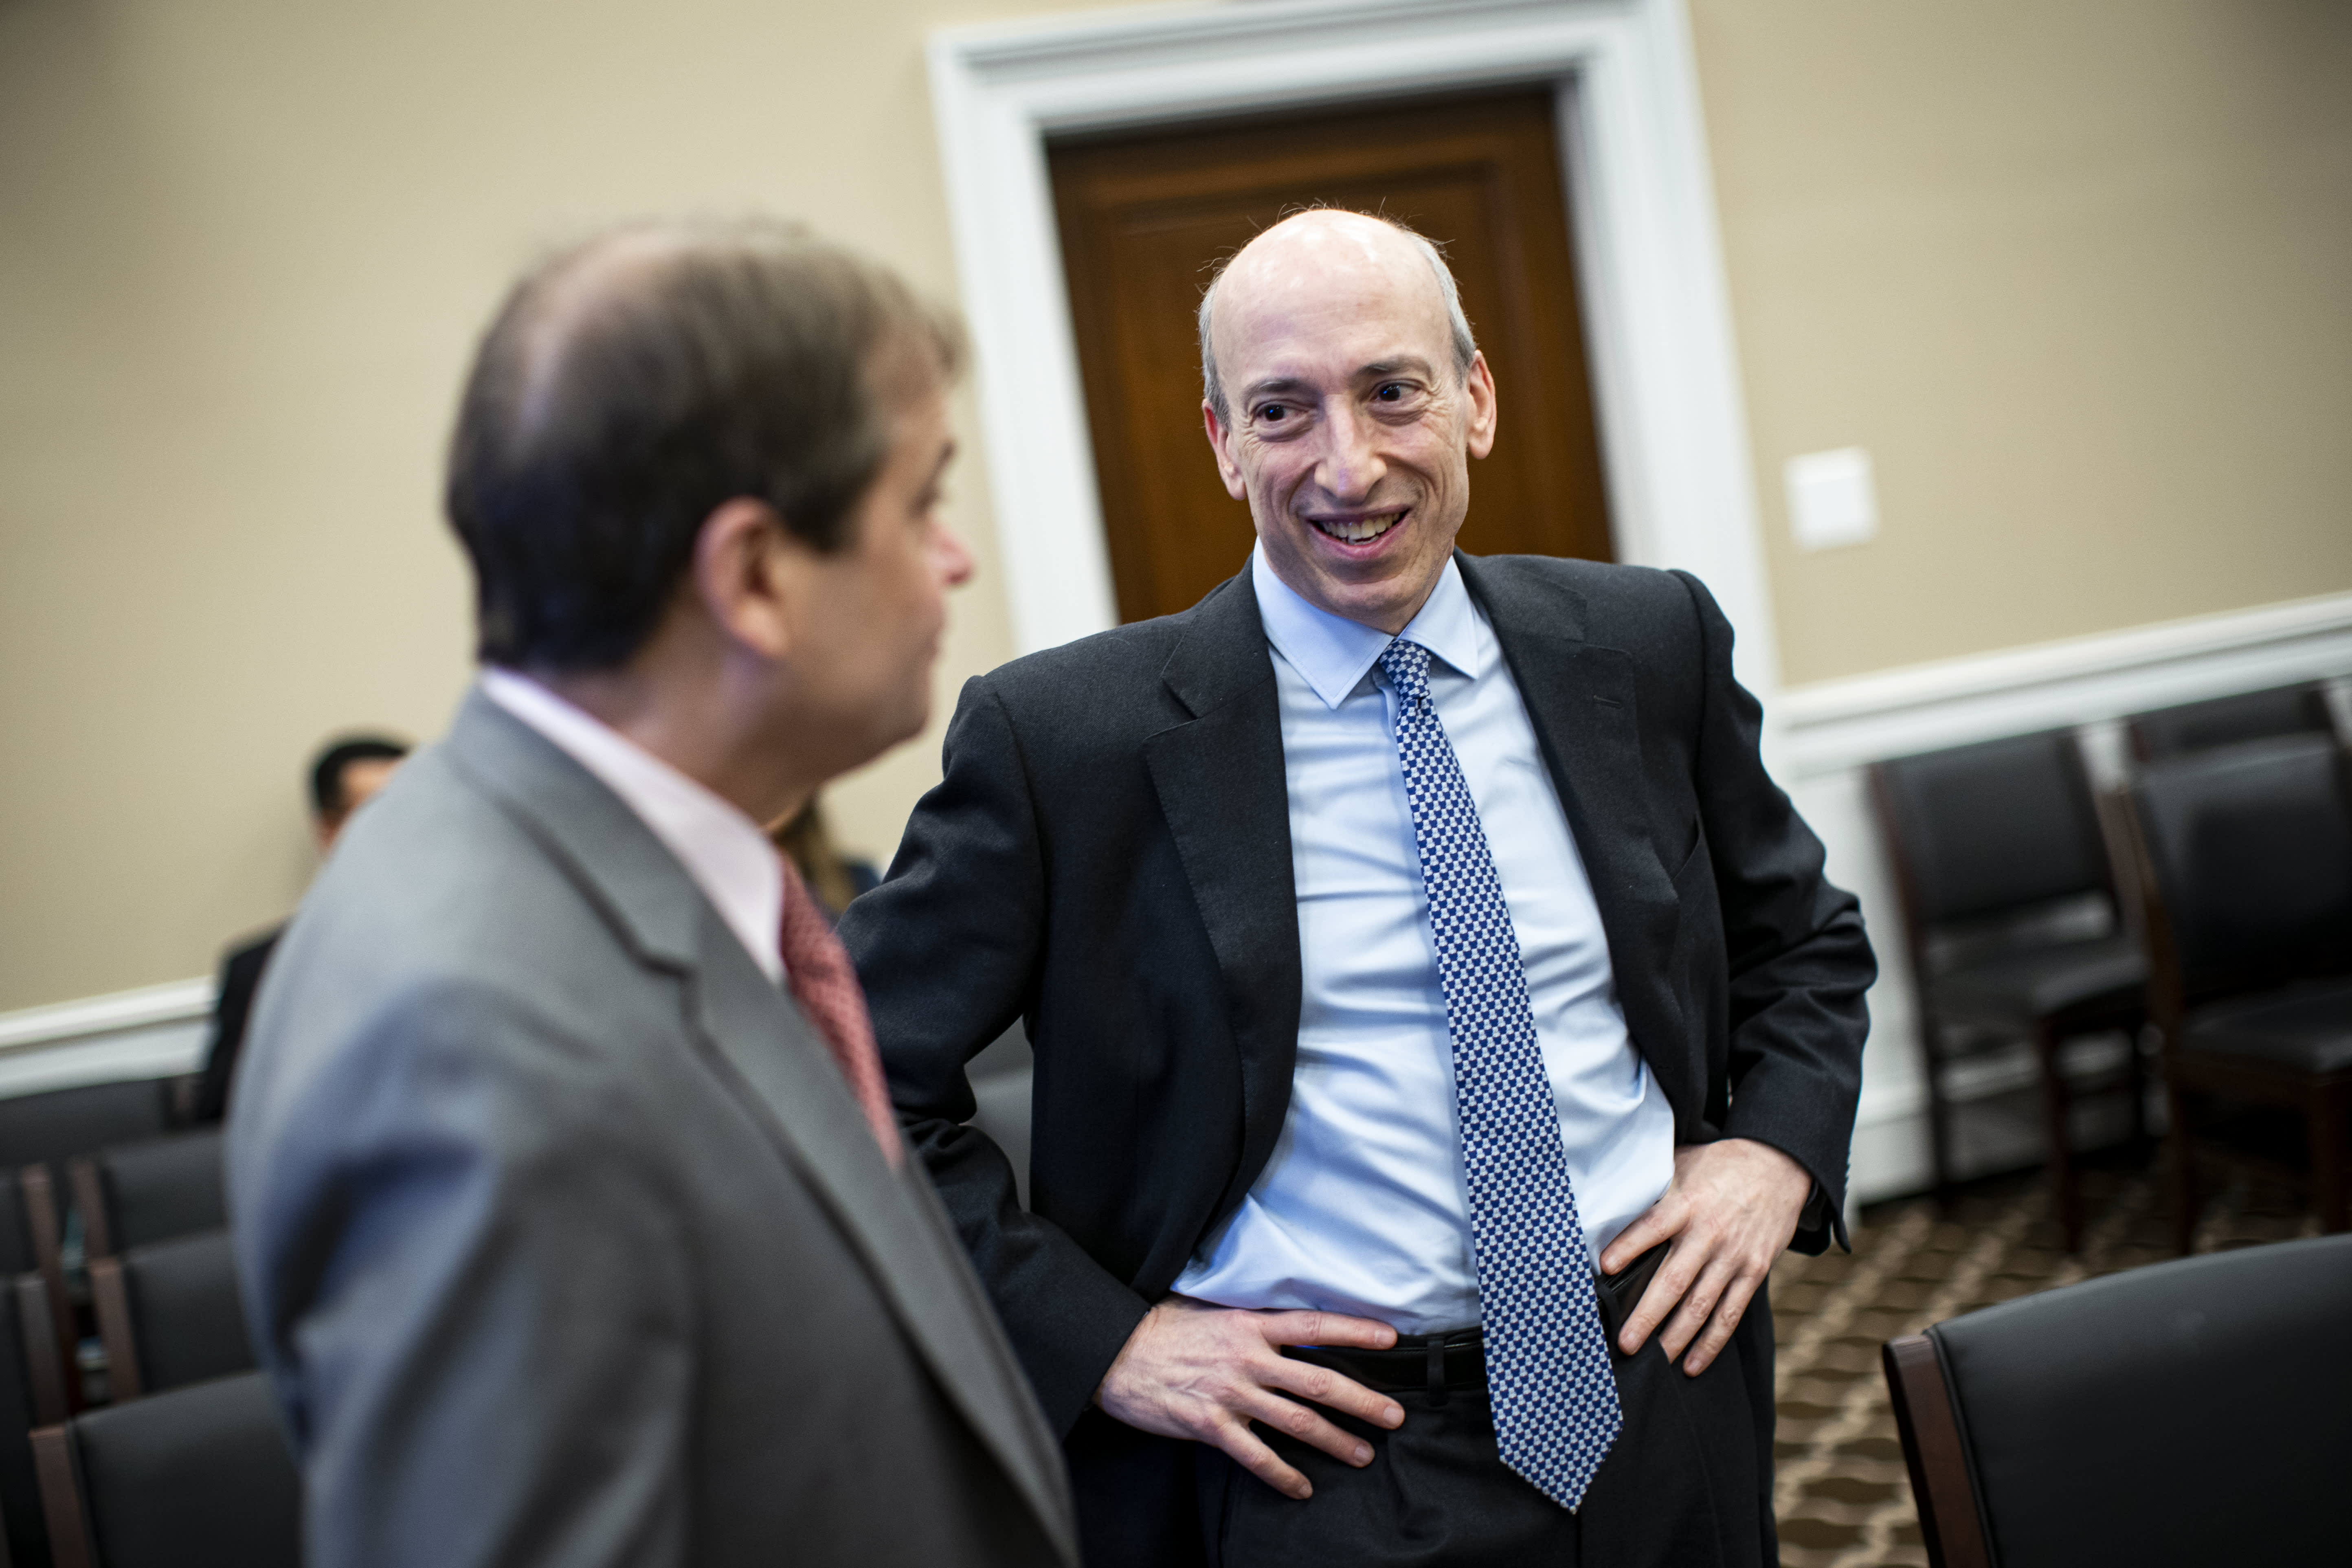 SEC Chairman Gary Gensler teases changes to the way the stock market operates